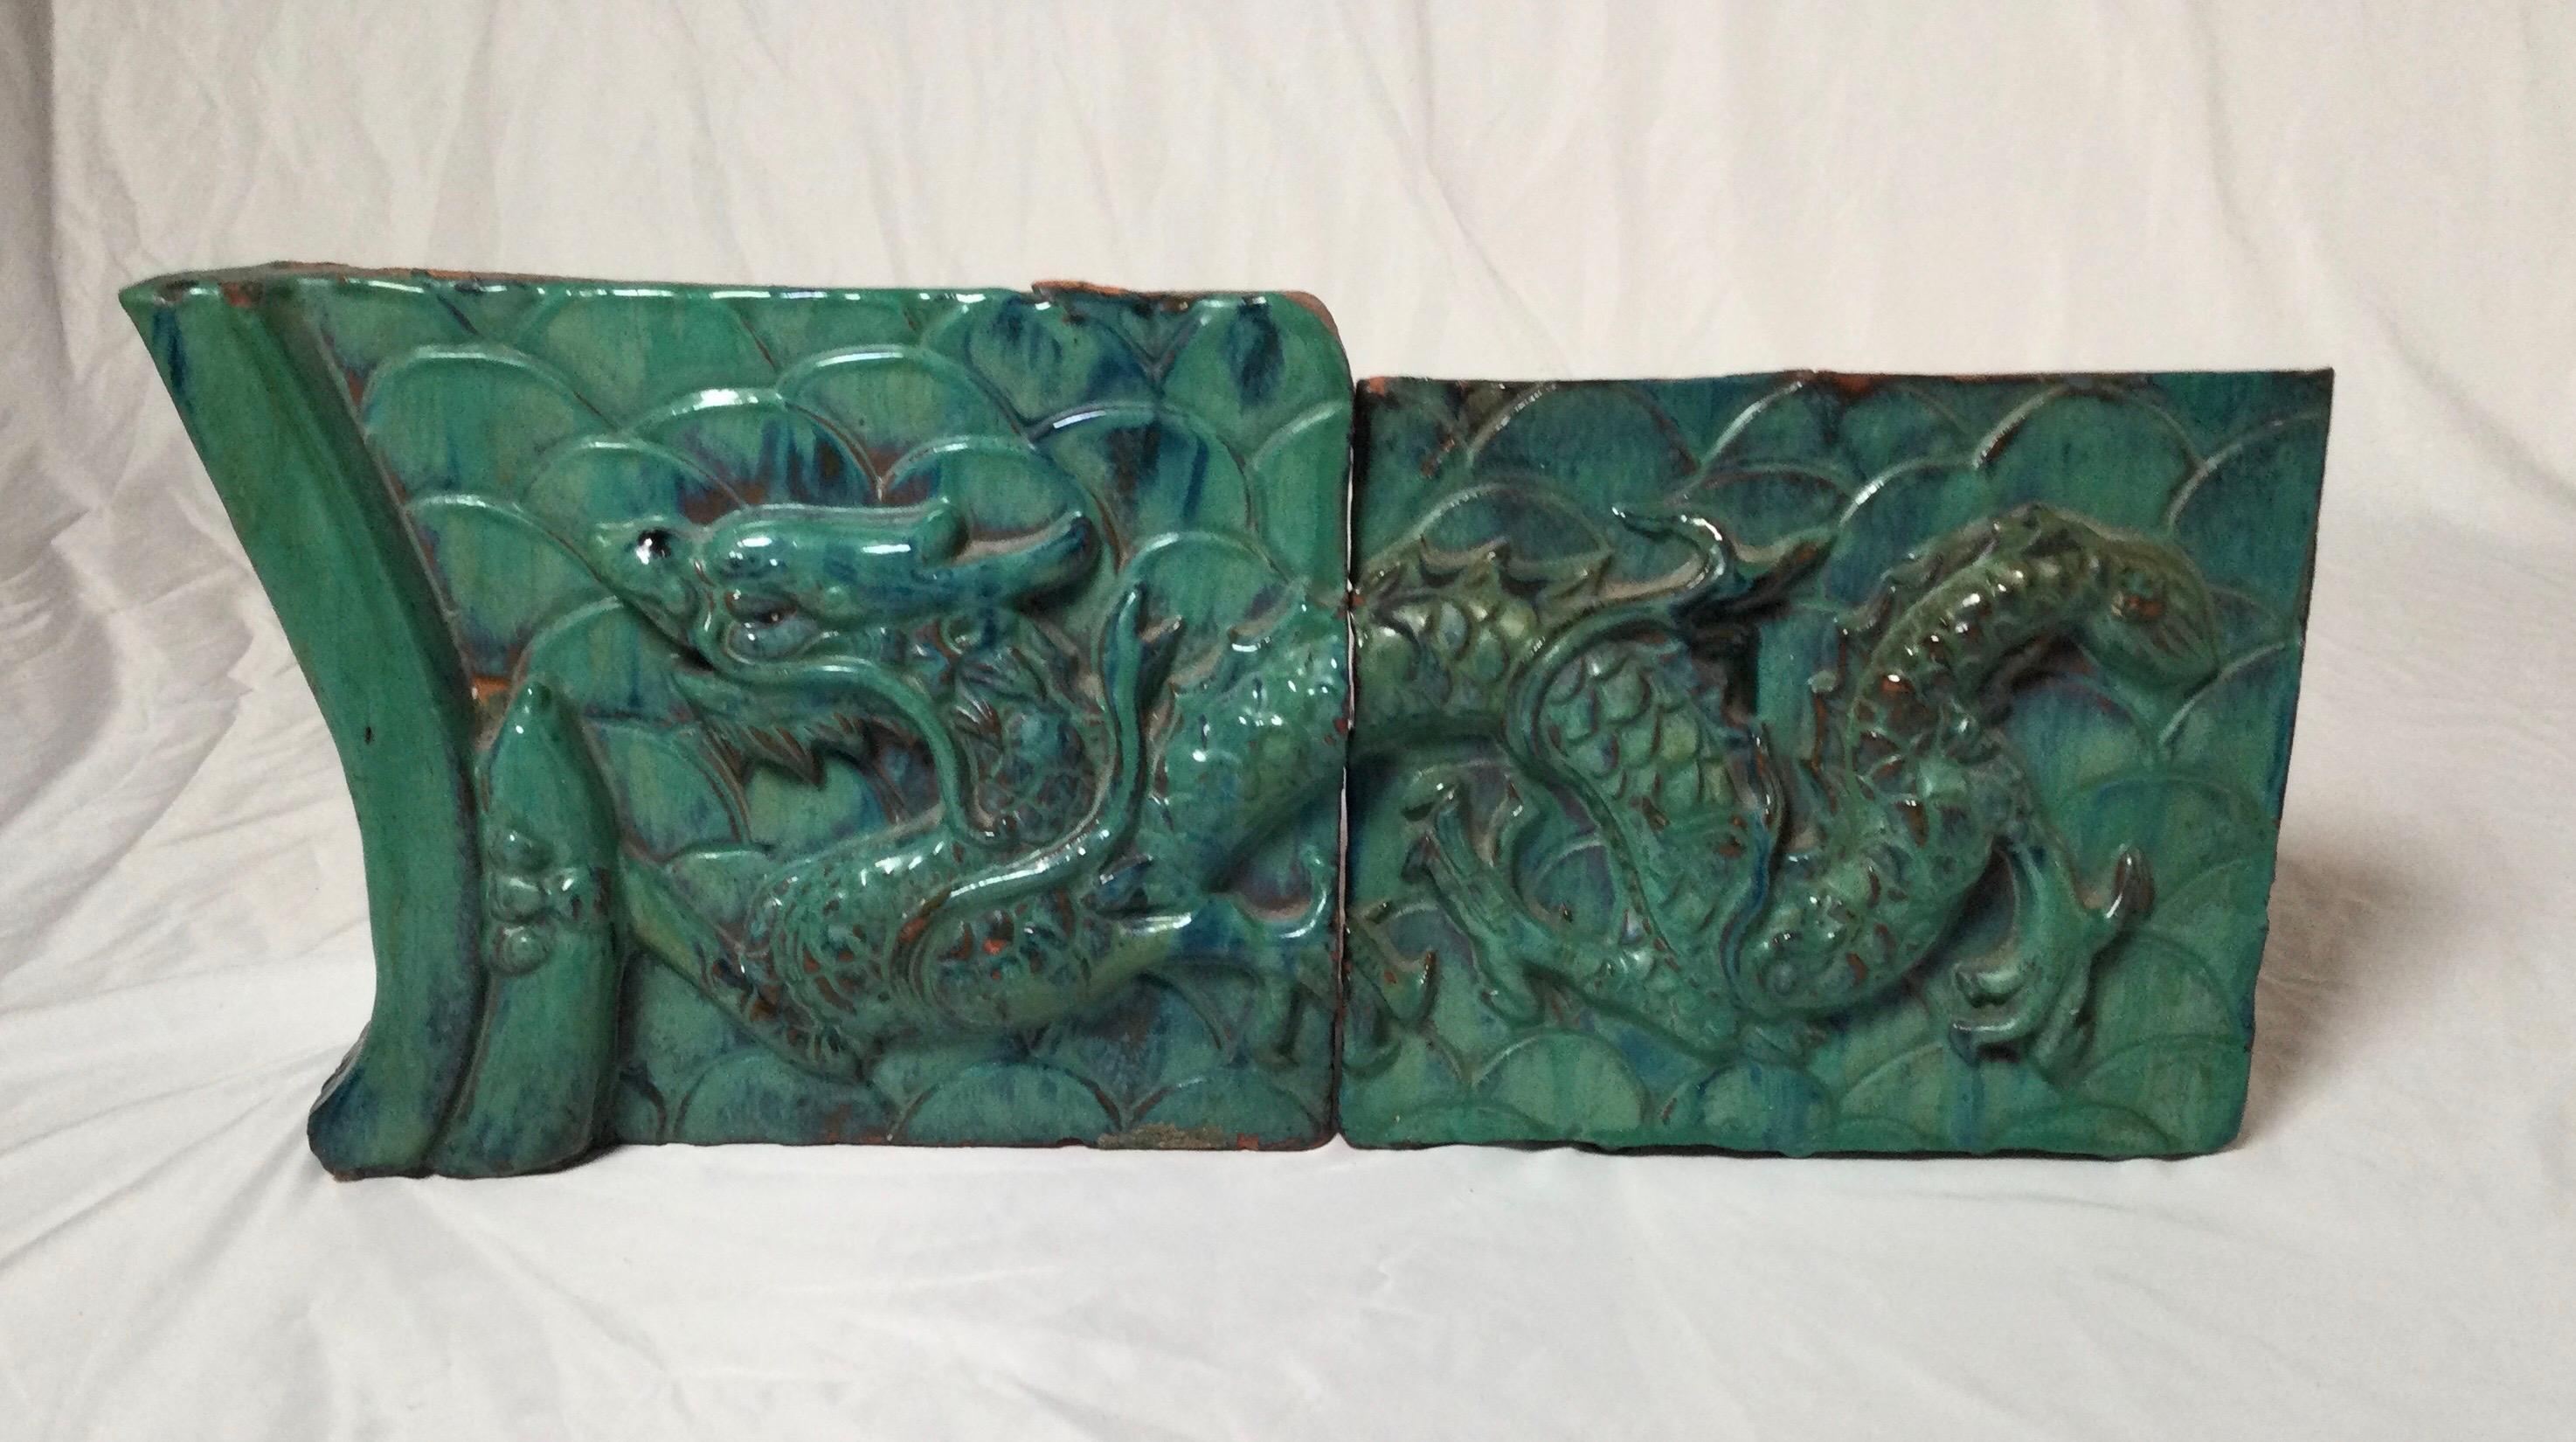 A high relief 2 part earthenware glazed dragon motif architectural element. The exceptional detail with a beautiful blue-green high glaze. Measures: 22 wide, 9.5 high, 2.5 deep.